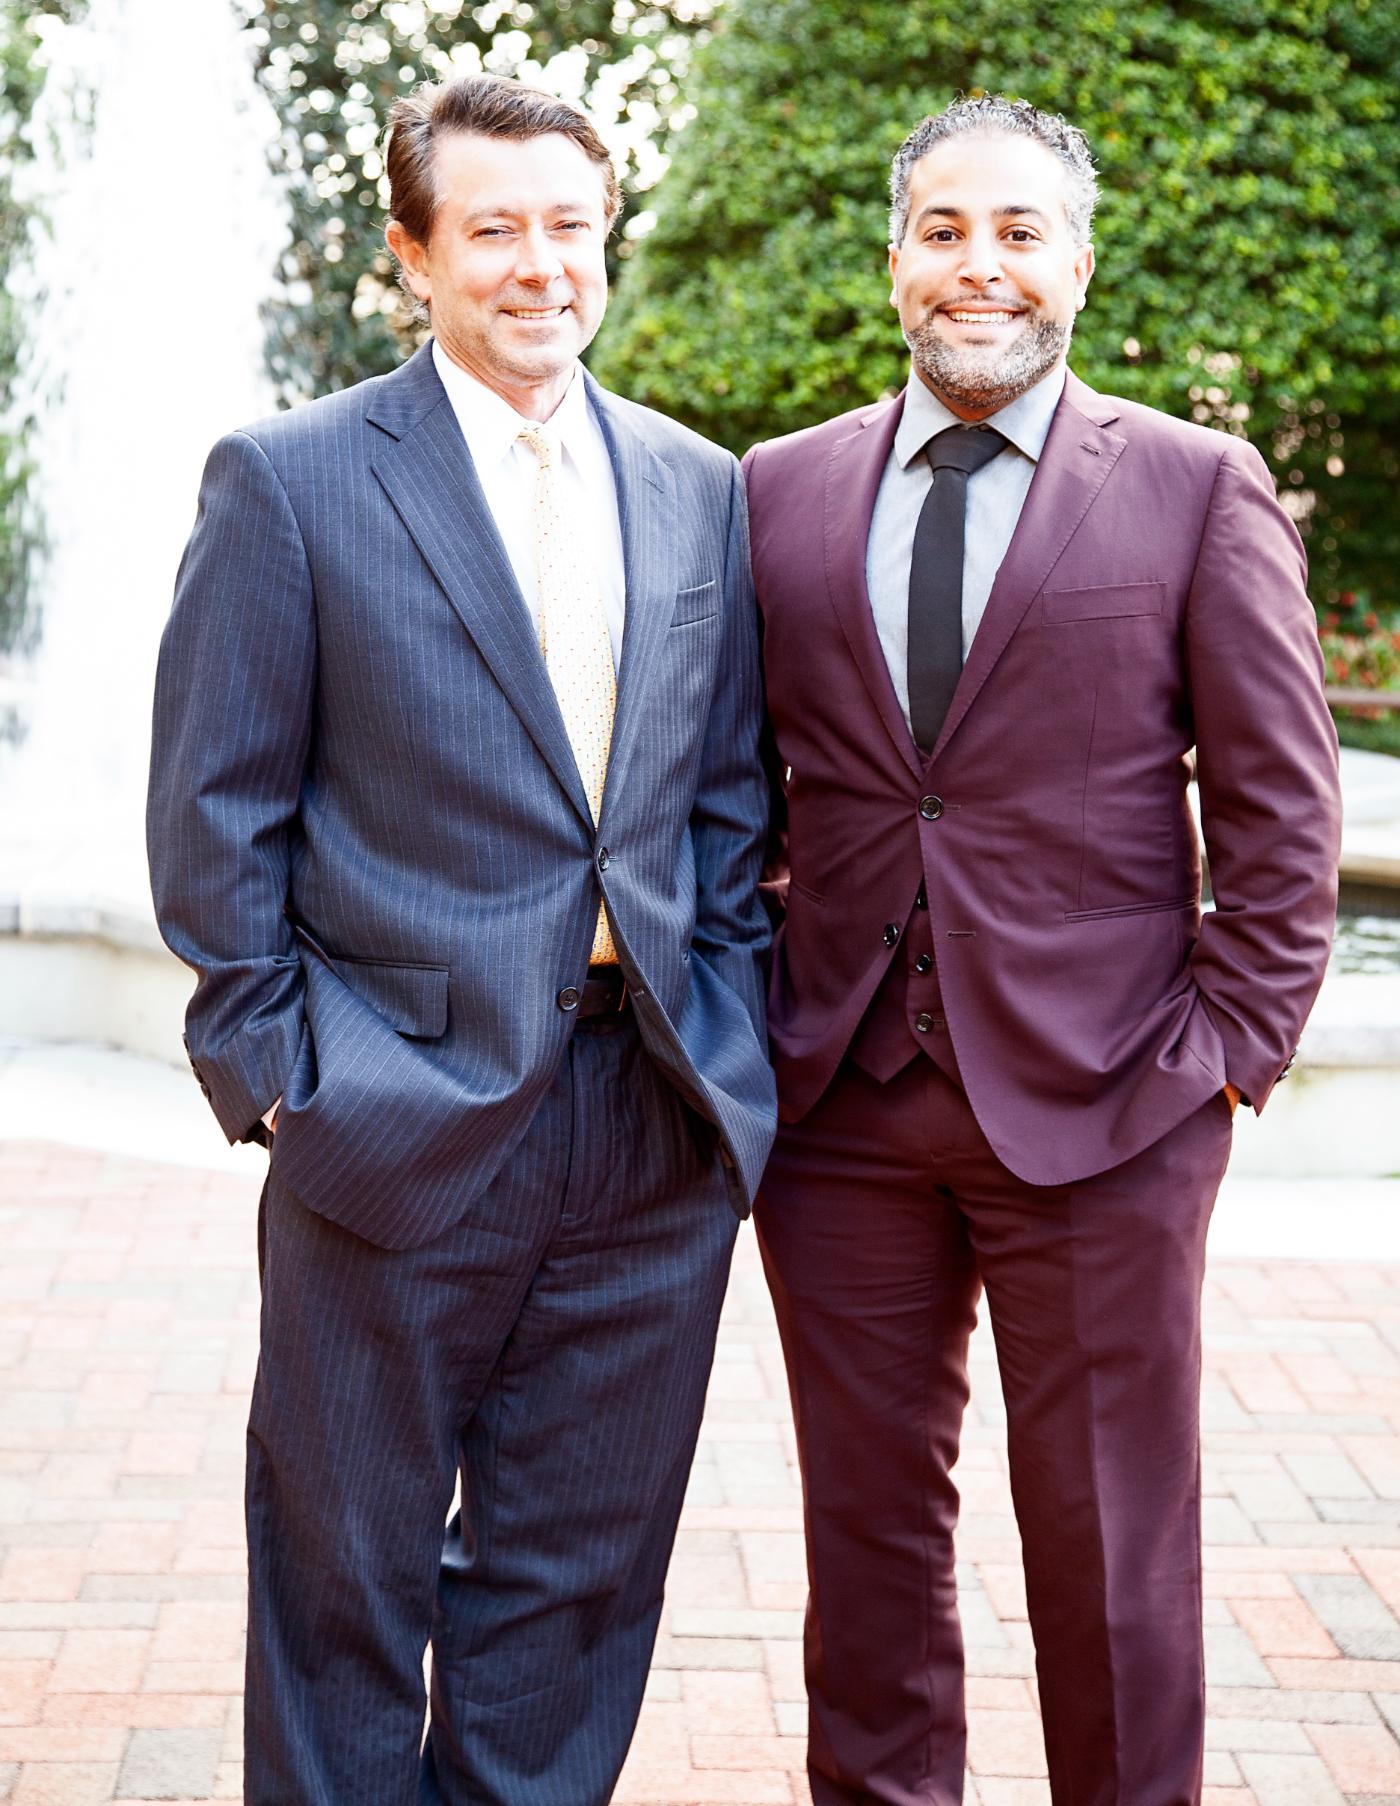 Dr Jules Feledy and Dr Maiorino, Plastic Surgeons in Washington DC & Chevy Chase